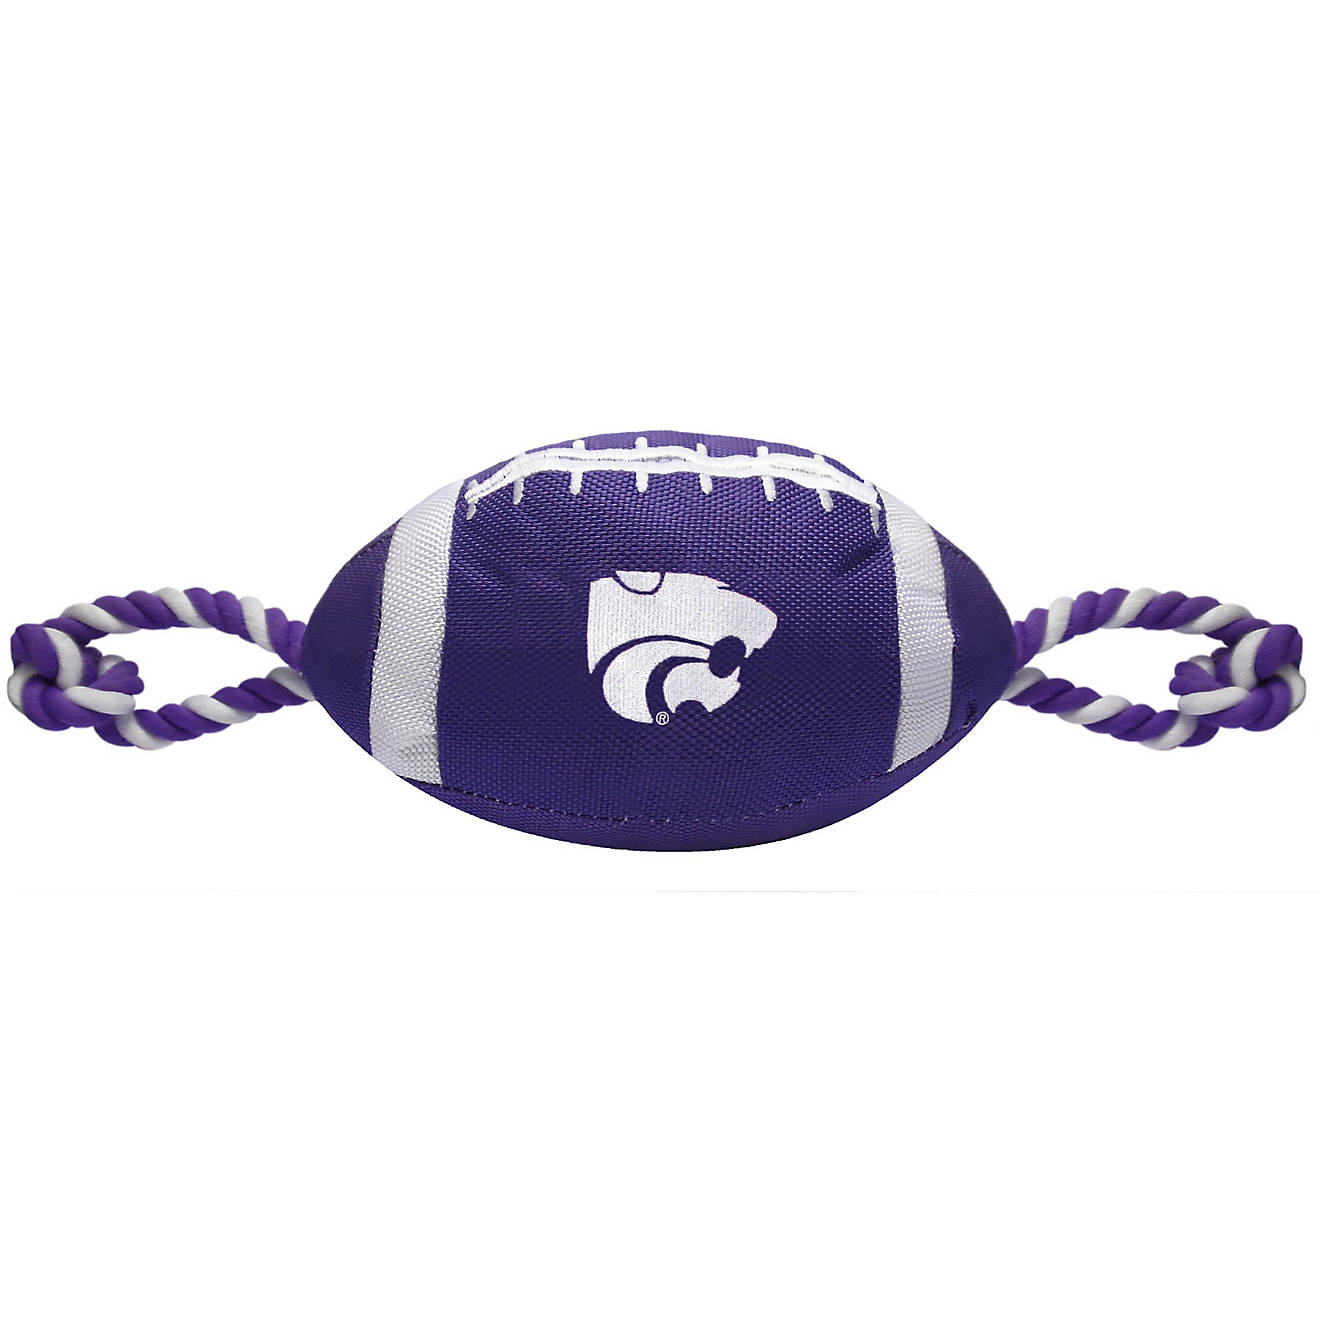 Pets First Kansas State University Nylon Football Rope Toy                                                                       - view number 1